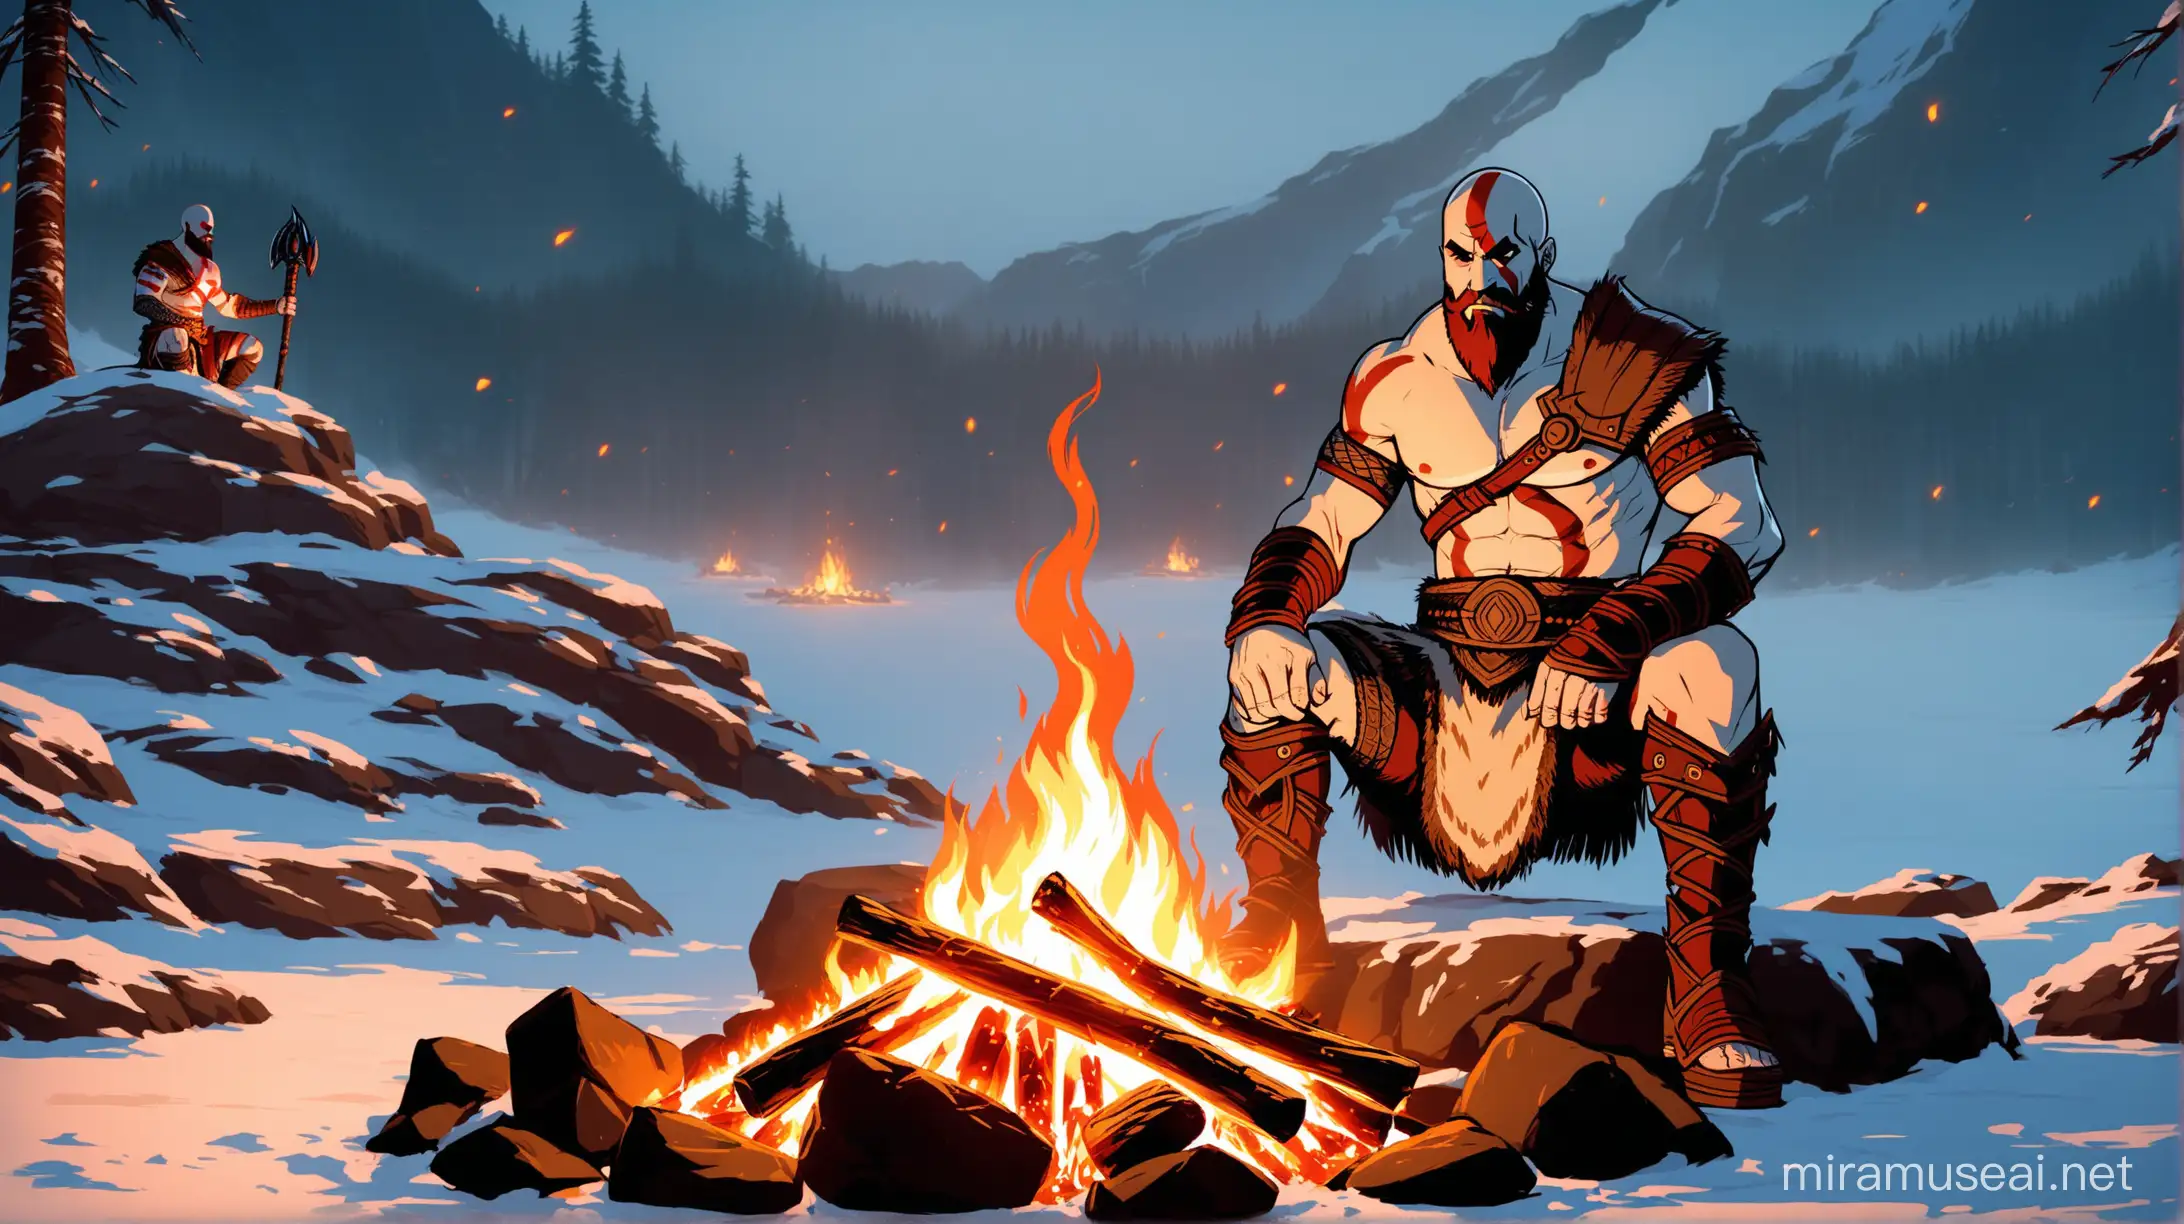 Kratos from God of War Ragnarok is sitting by a fire